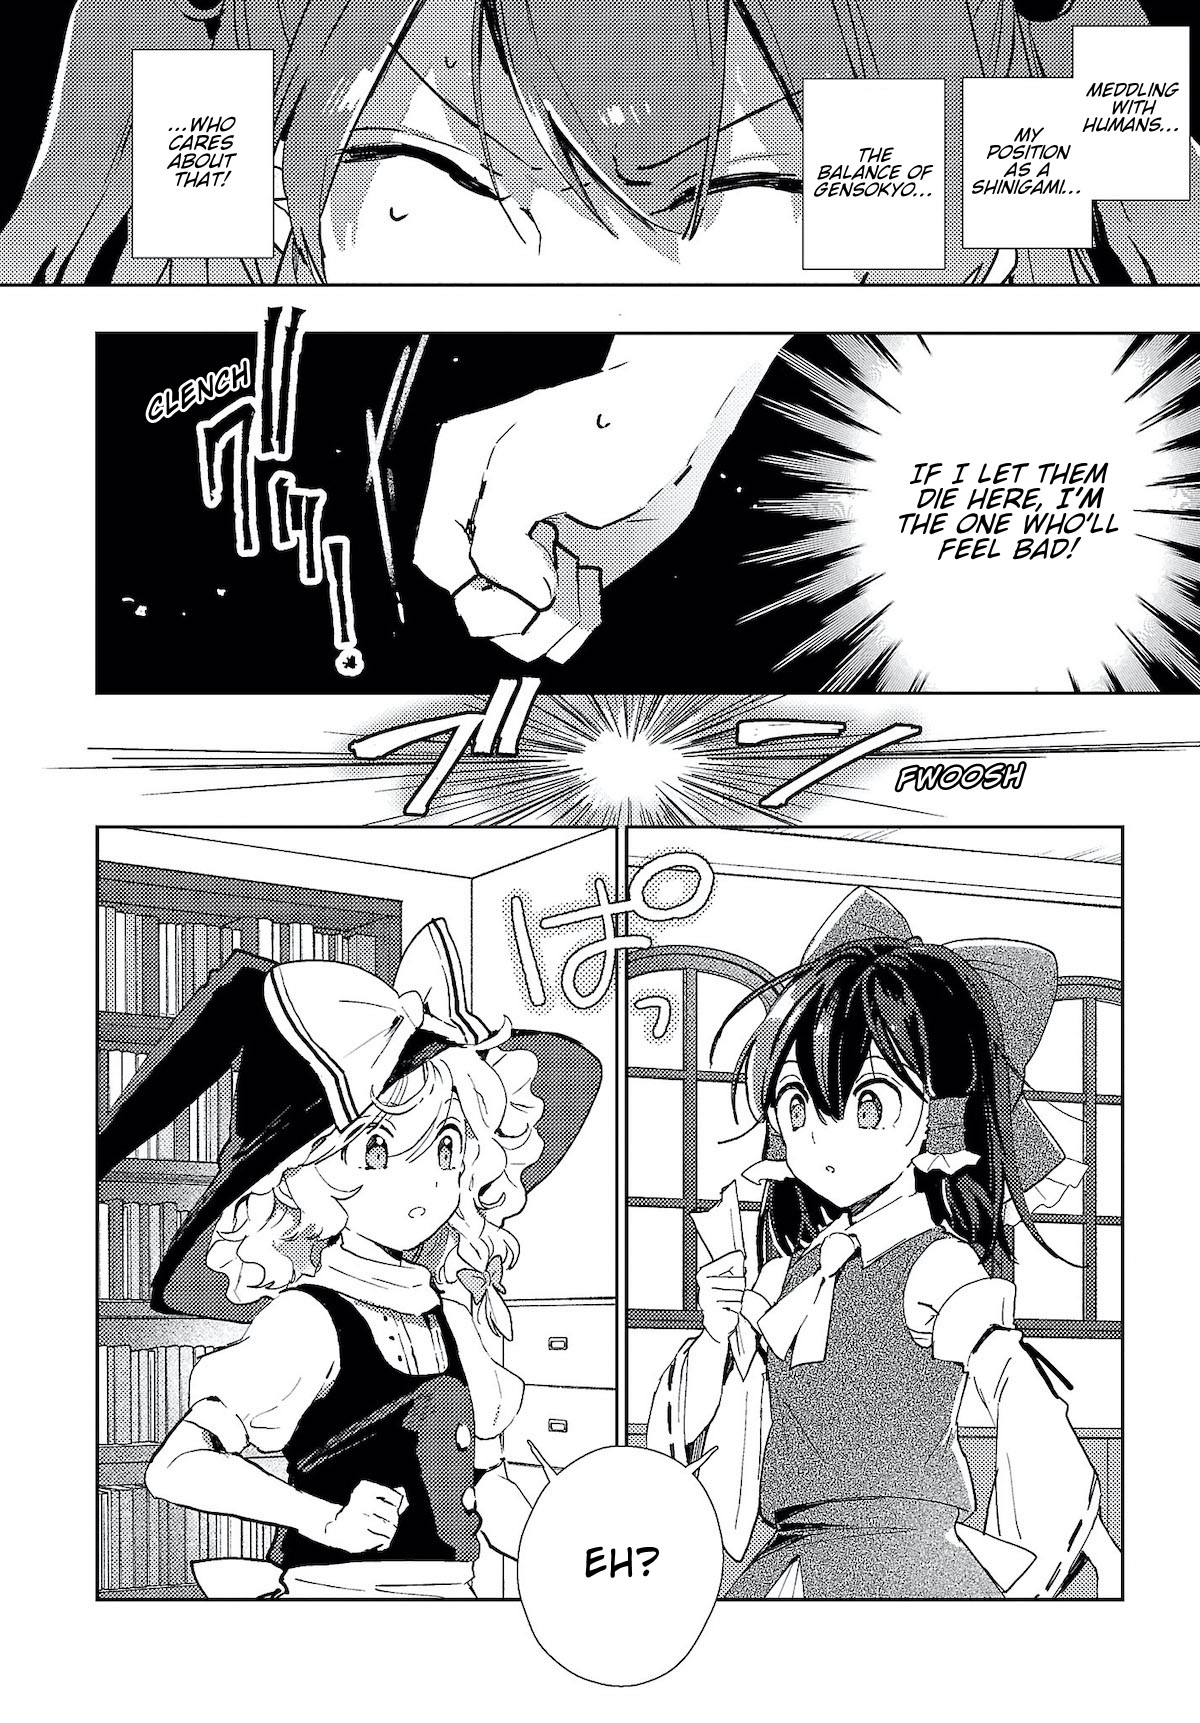 The Shinigami's Rowing Her Boat As Usual - Touhou Chapter 4 #16